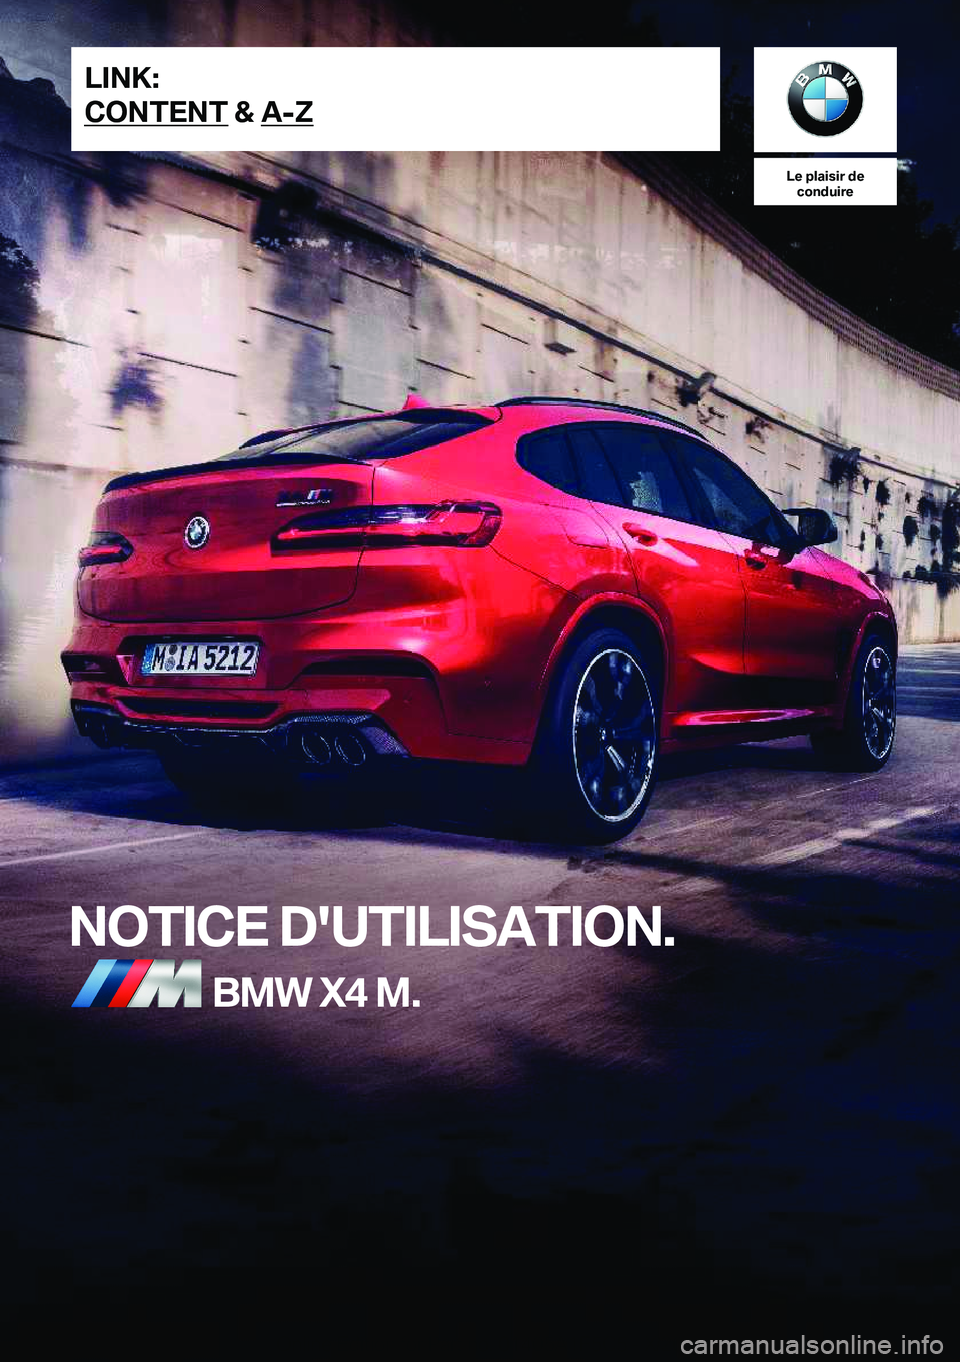 BMW X4 M 2021  Notices Demploi (in French) �L�e��p�l�a�i�s�i�r��d�e�c�o�n�d�u�i�r�e
�N�O�T�I�C�E��D�'�U�T�I�L�I�S�A�T�I�O�N�.�B�M�W��X�4��M�.�L�I�N�K�:
�C�O�N�T�E�N�T��&��A�-�Z�O�n�l�i�n�e��E�d�i�t�i�o�n��f�o�r��P�a�r�t��n�o�.�